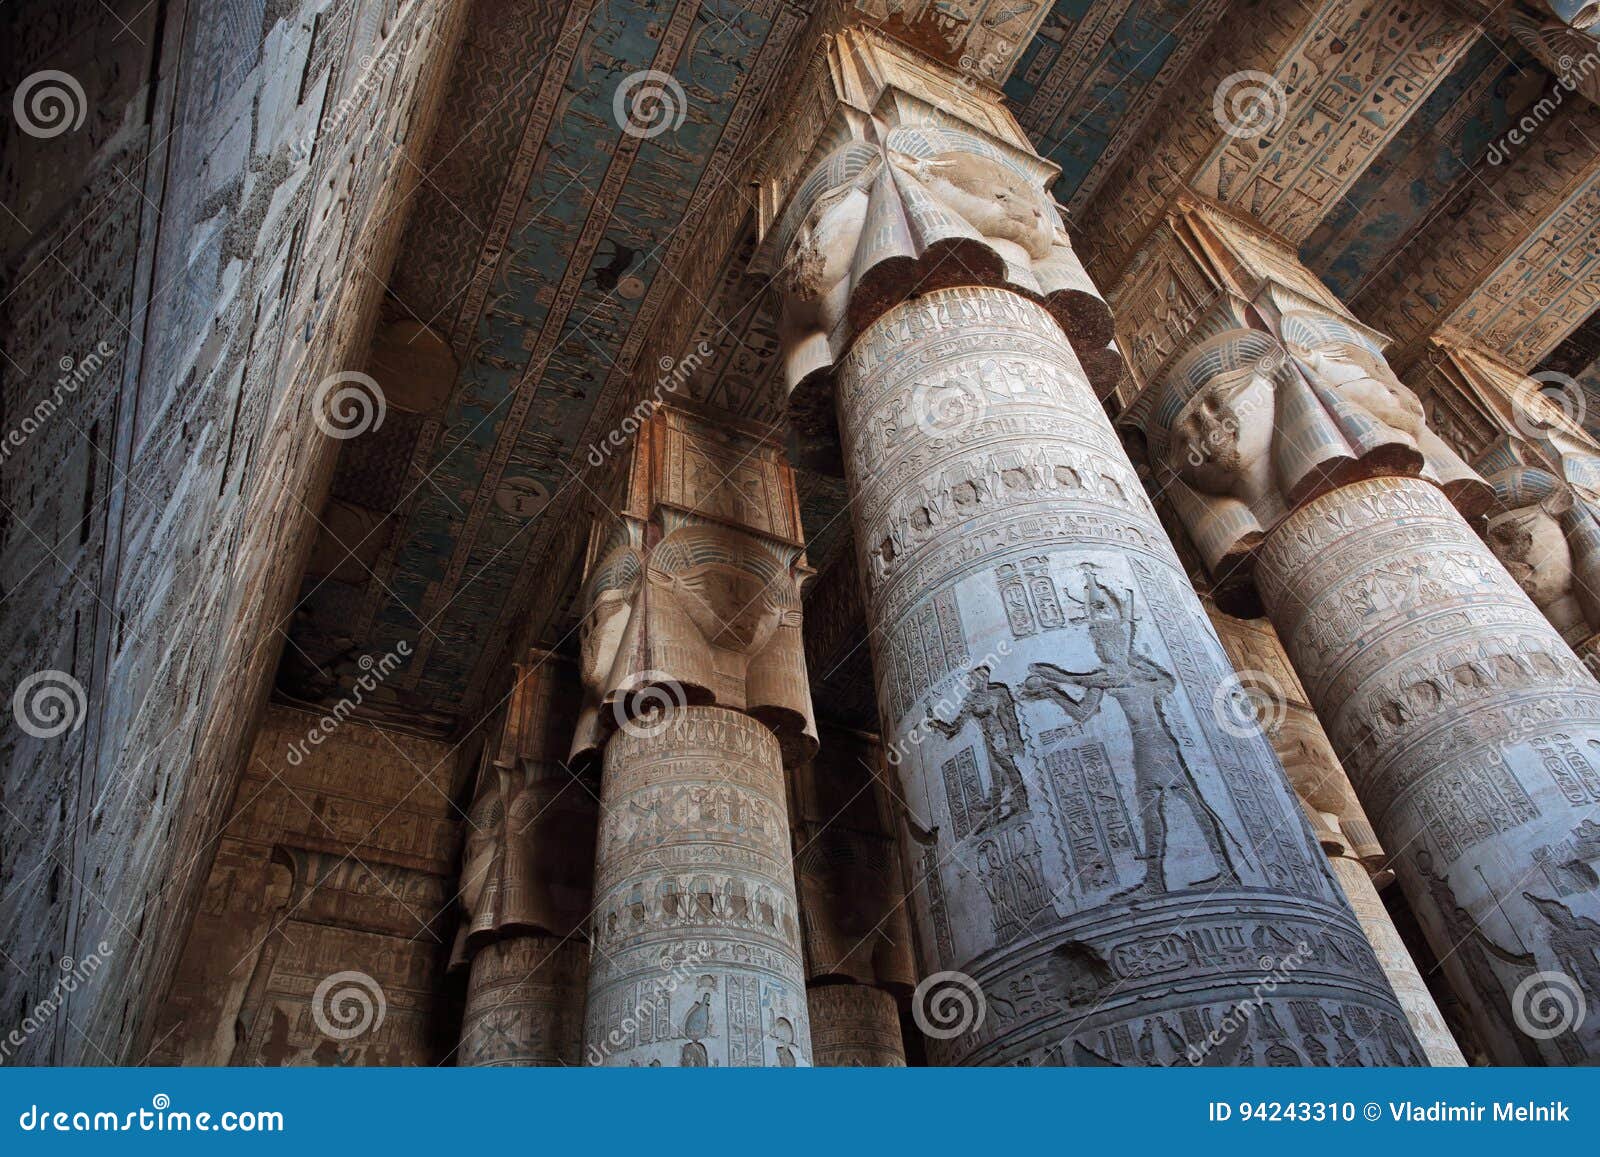 decorated pillars and ceiling in dendera temple, egypt